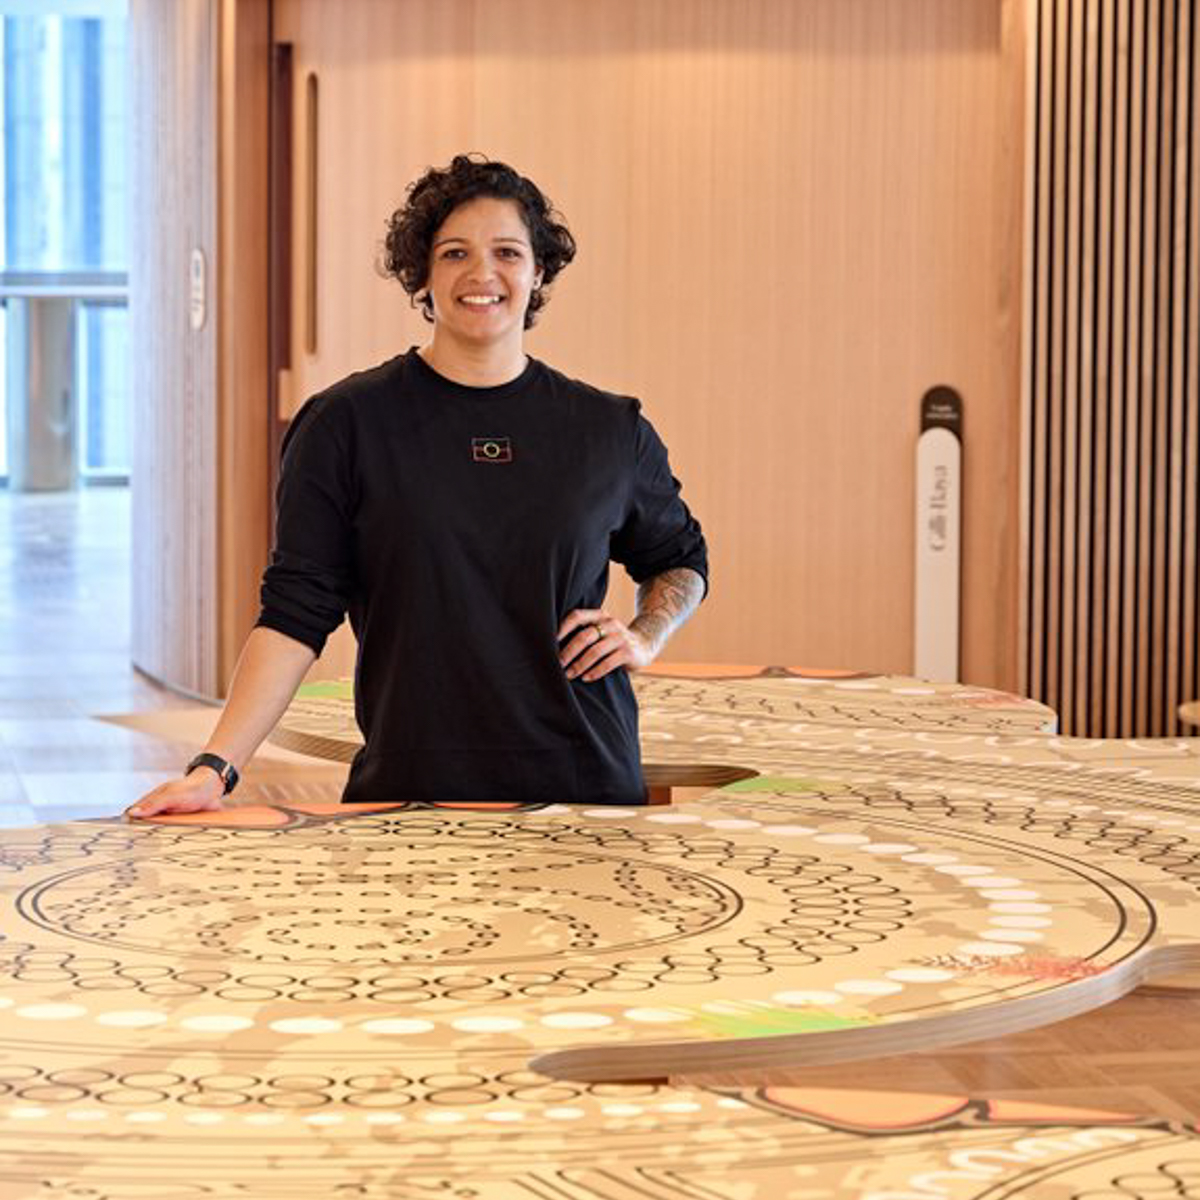 A smiling woman wearing a black shirt stands in a wooden room, in front of an artwork.